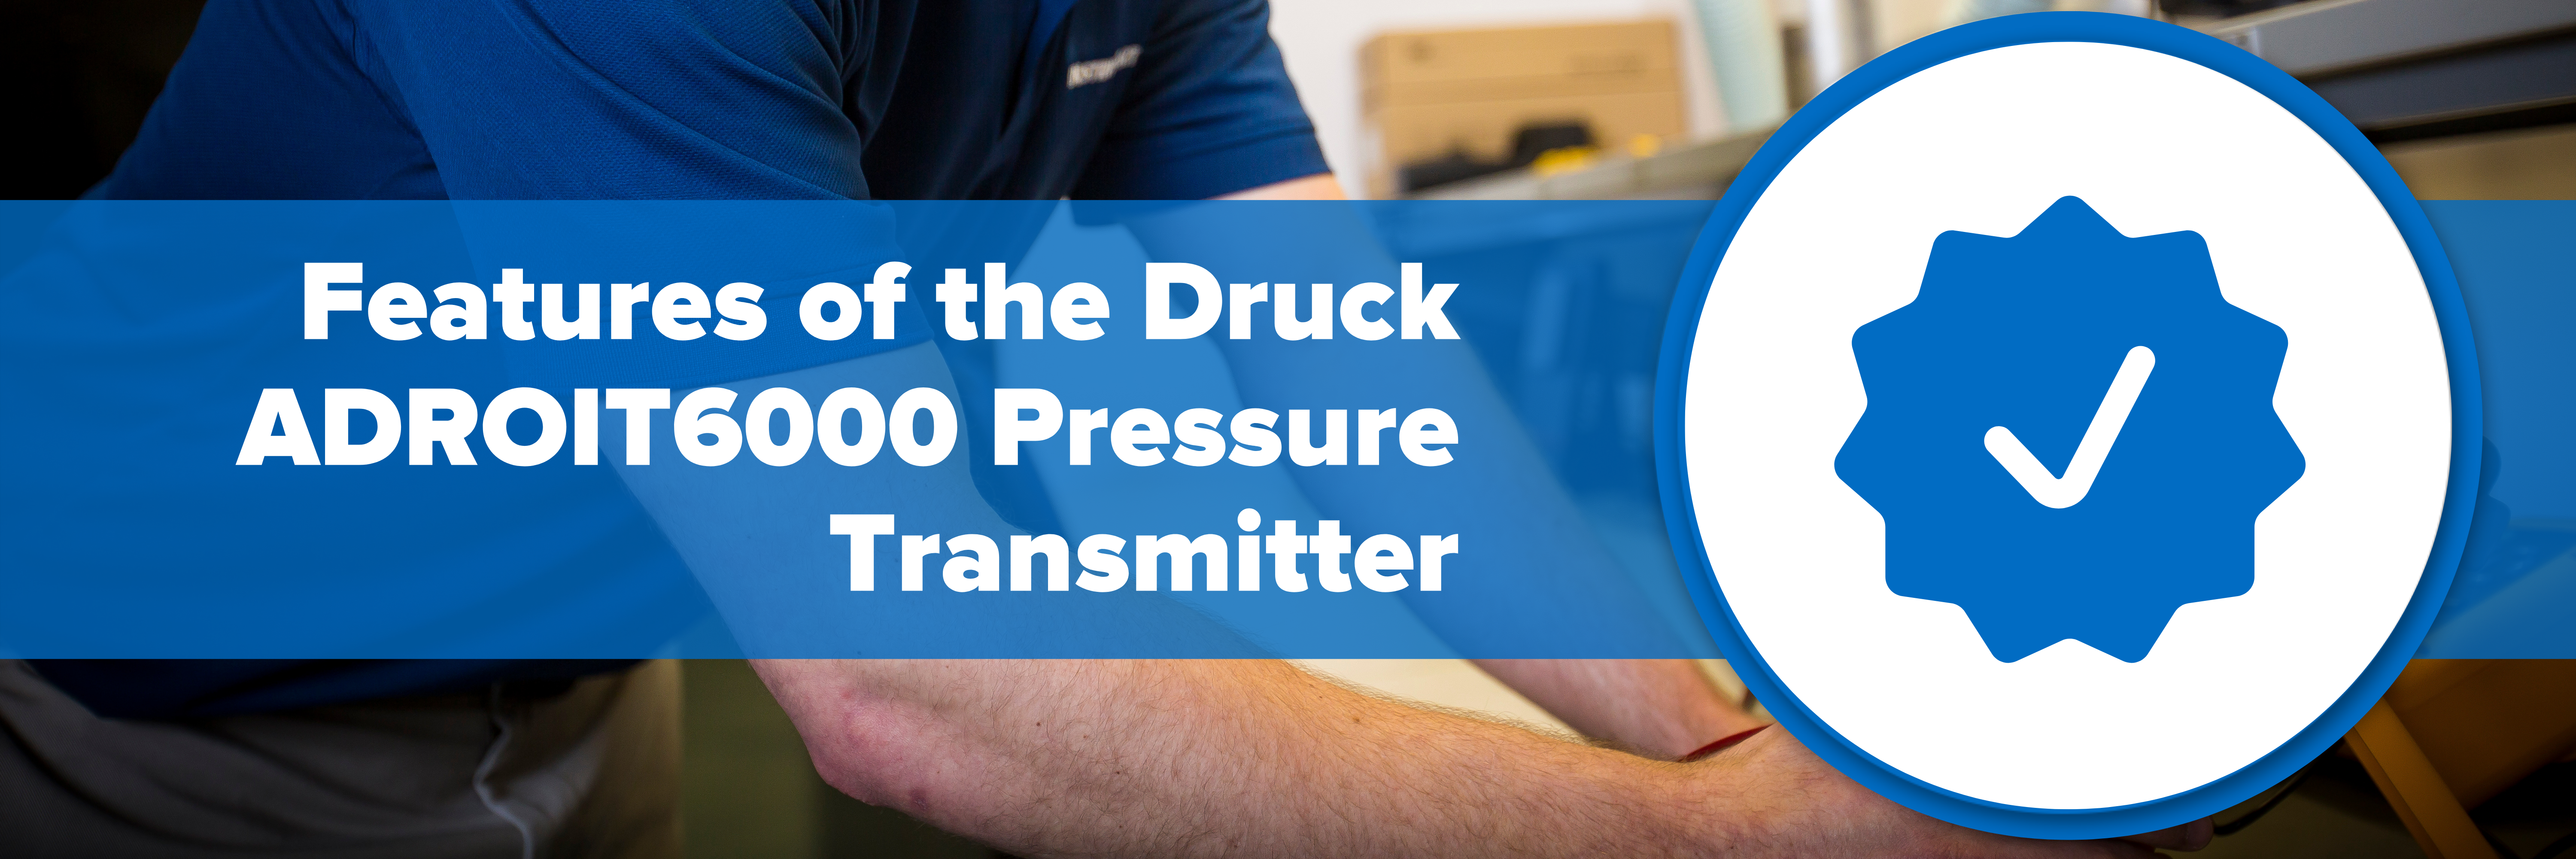 Header image with text "Features of the Druck ADROIT6000 Pressure Transmitter"